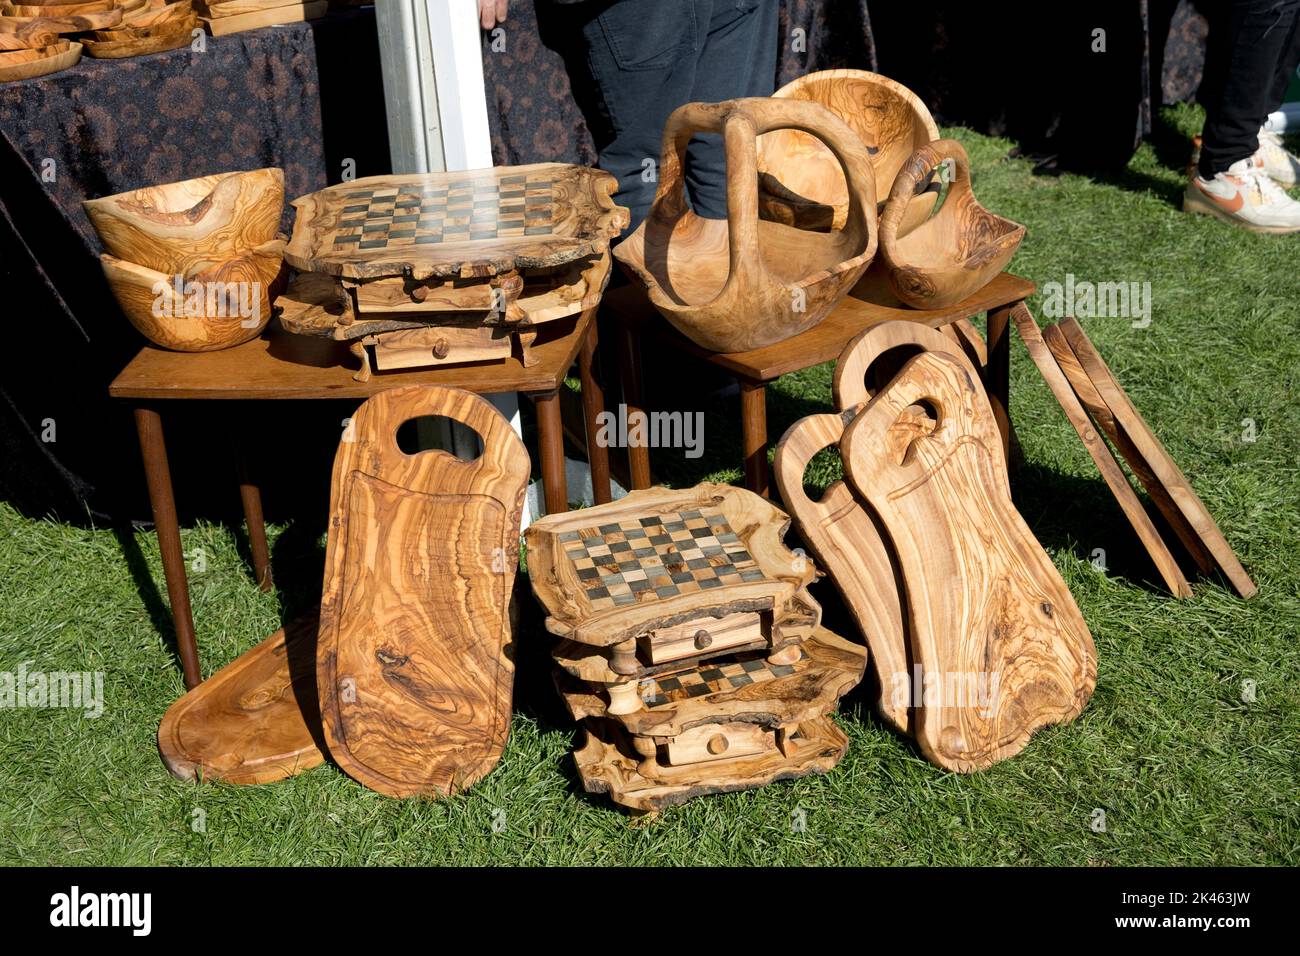 Carved Olive wood Olea europaea products including bowls, cutting boards and chess boards  at autumn show Three Counties Showground, Great Malvern, UK Stock Photo